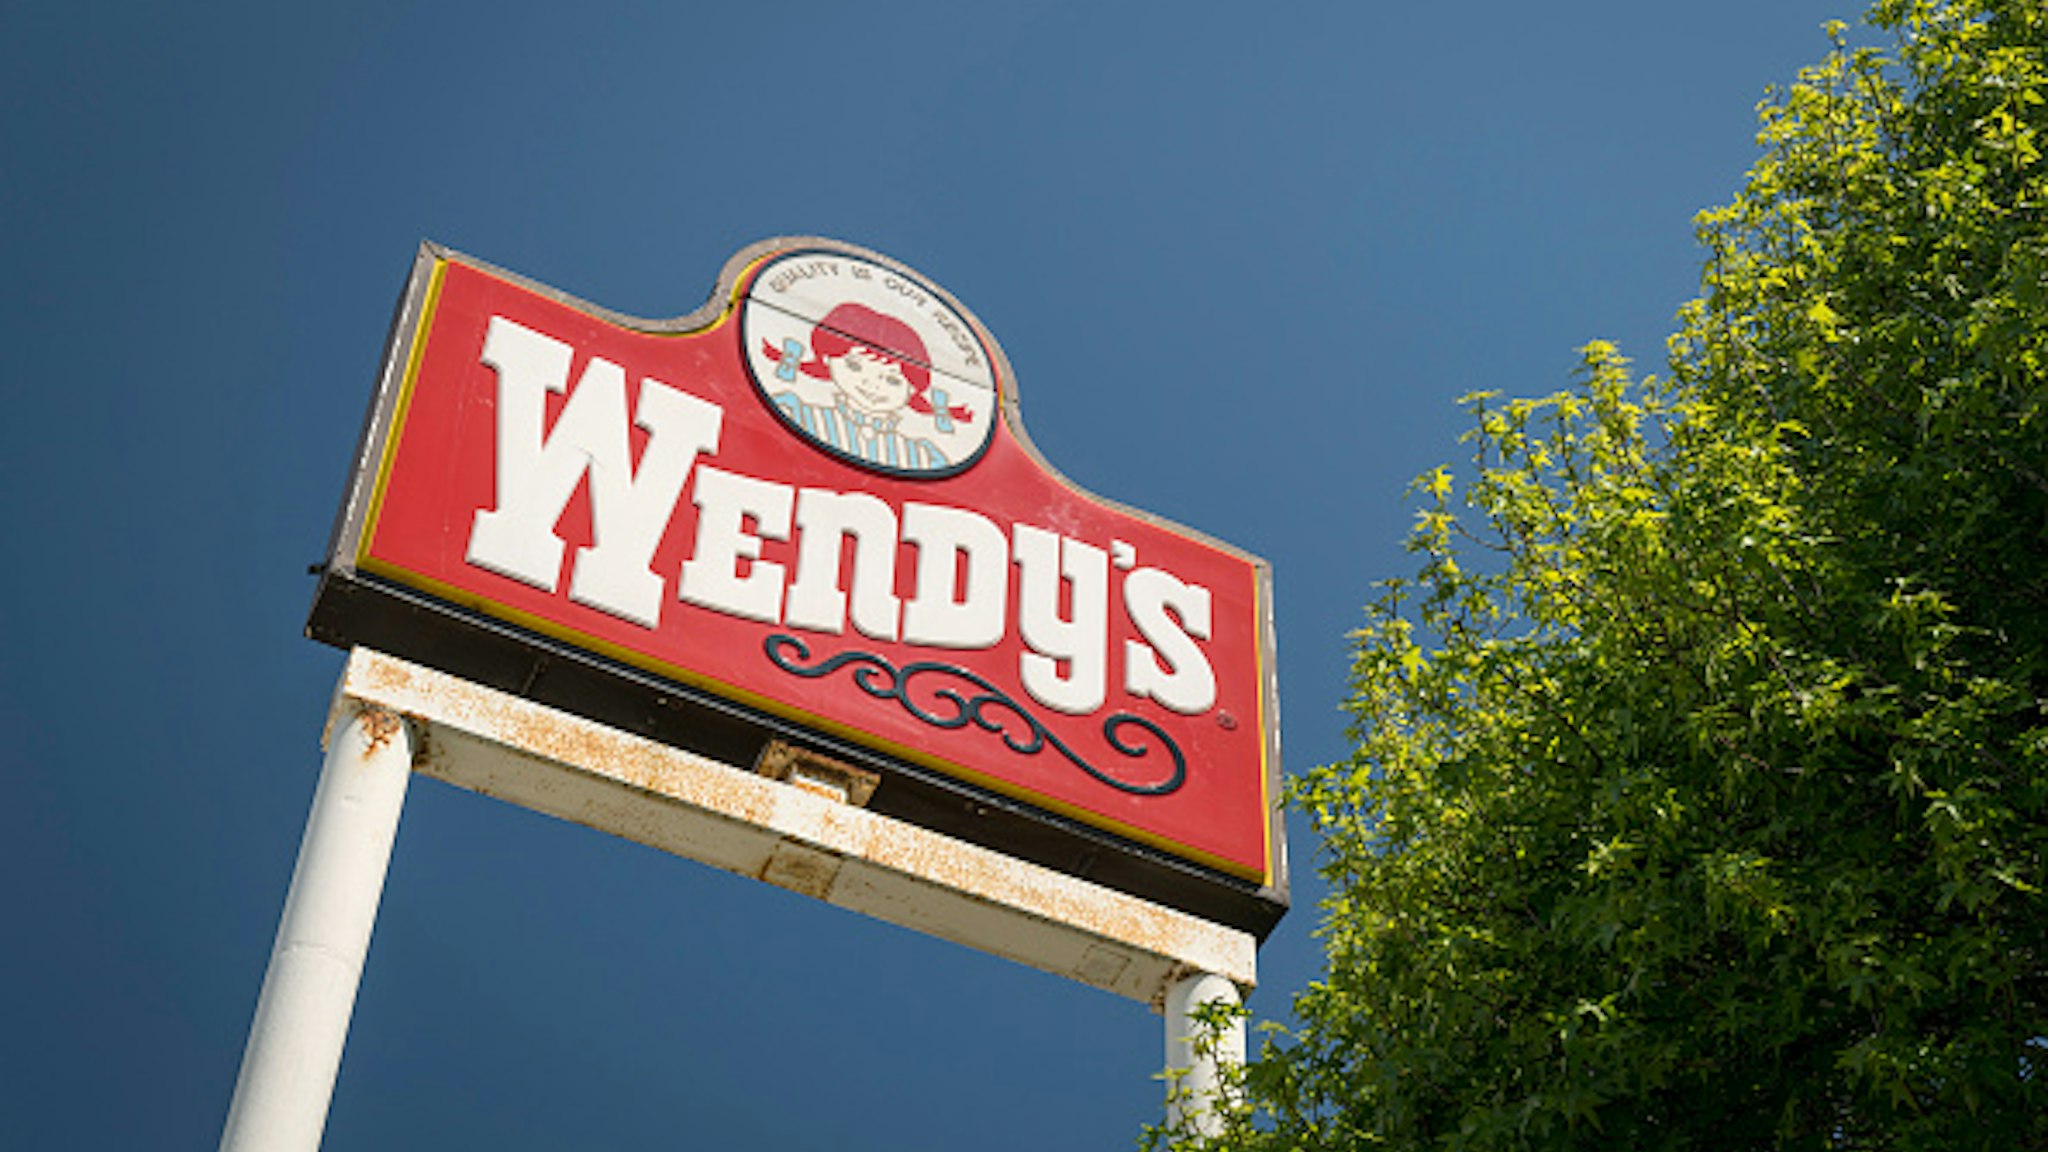 Signage is displayed at a Wendys Co. restaurant in Richmond, California, U.S., on Wednesday, May 6, 2020. Fast-food chain Wendys Co. jumped the most in a month after reporting that the sales slump caused by the Covid-19 pandemic is easing.